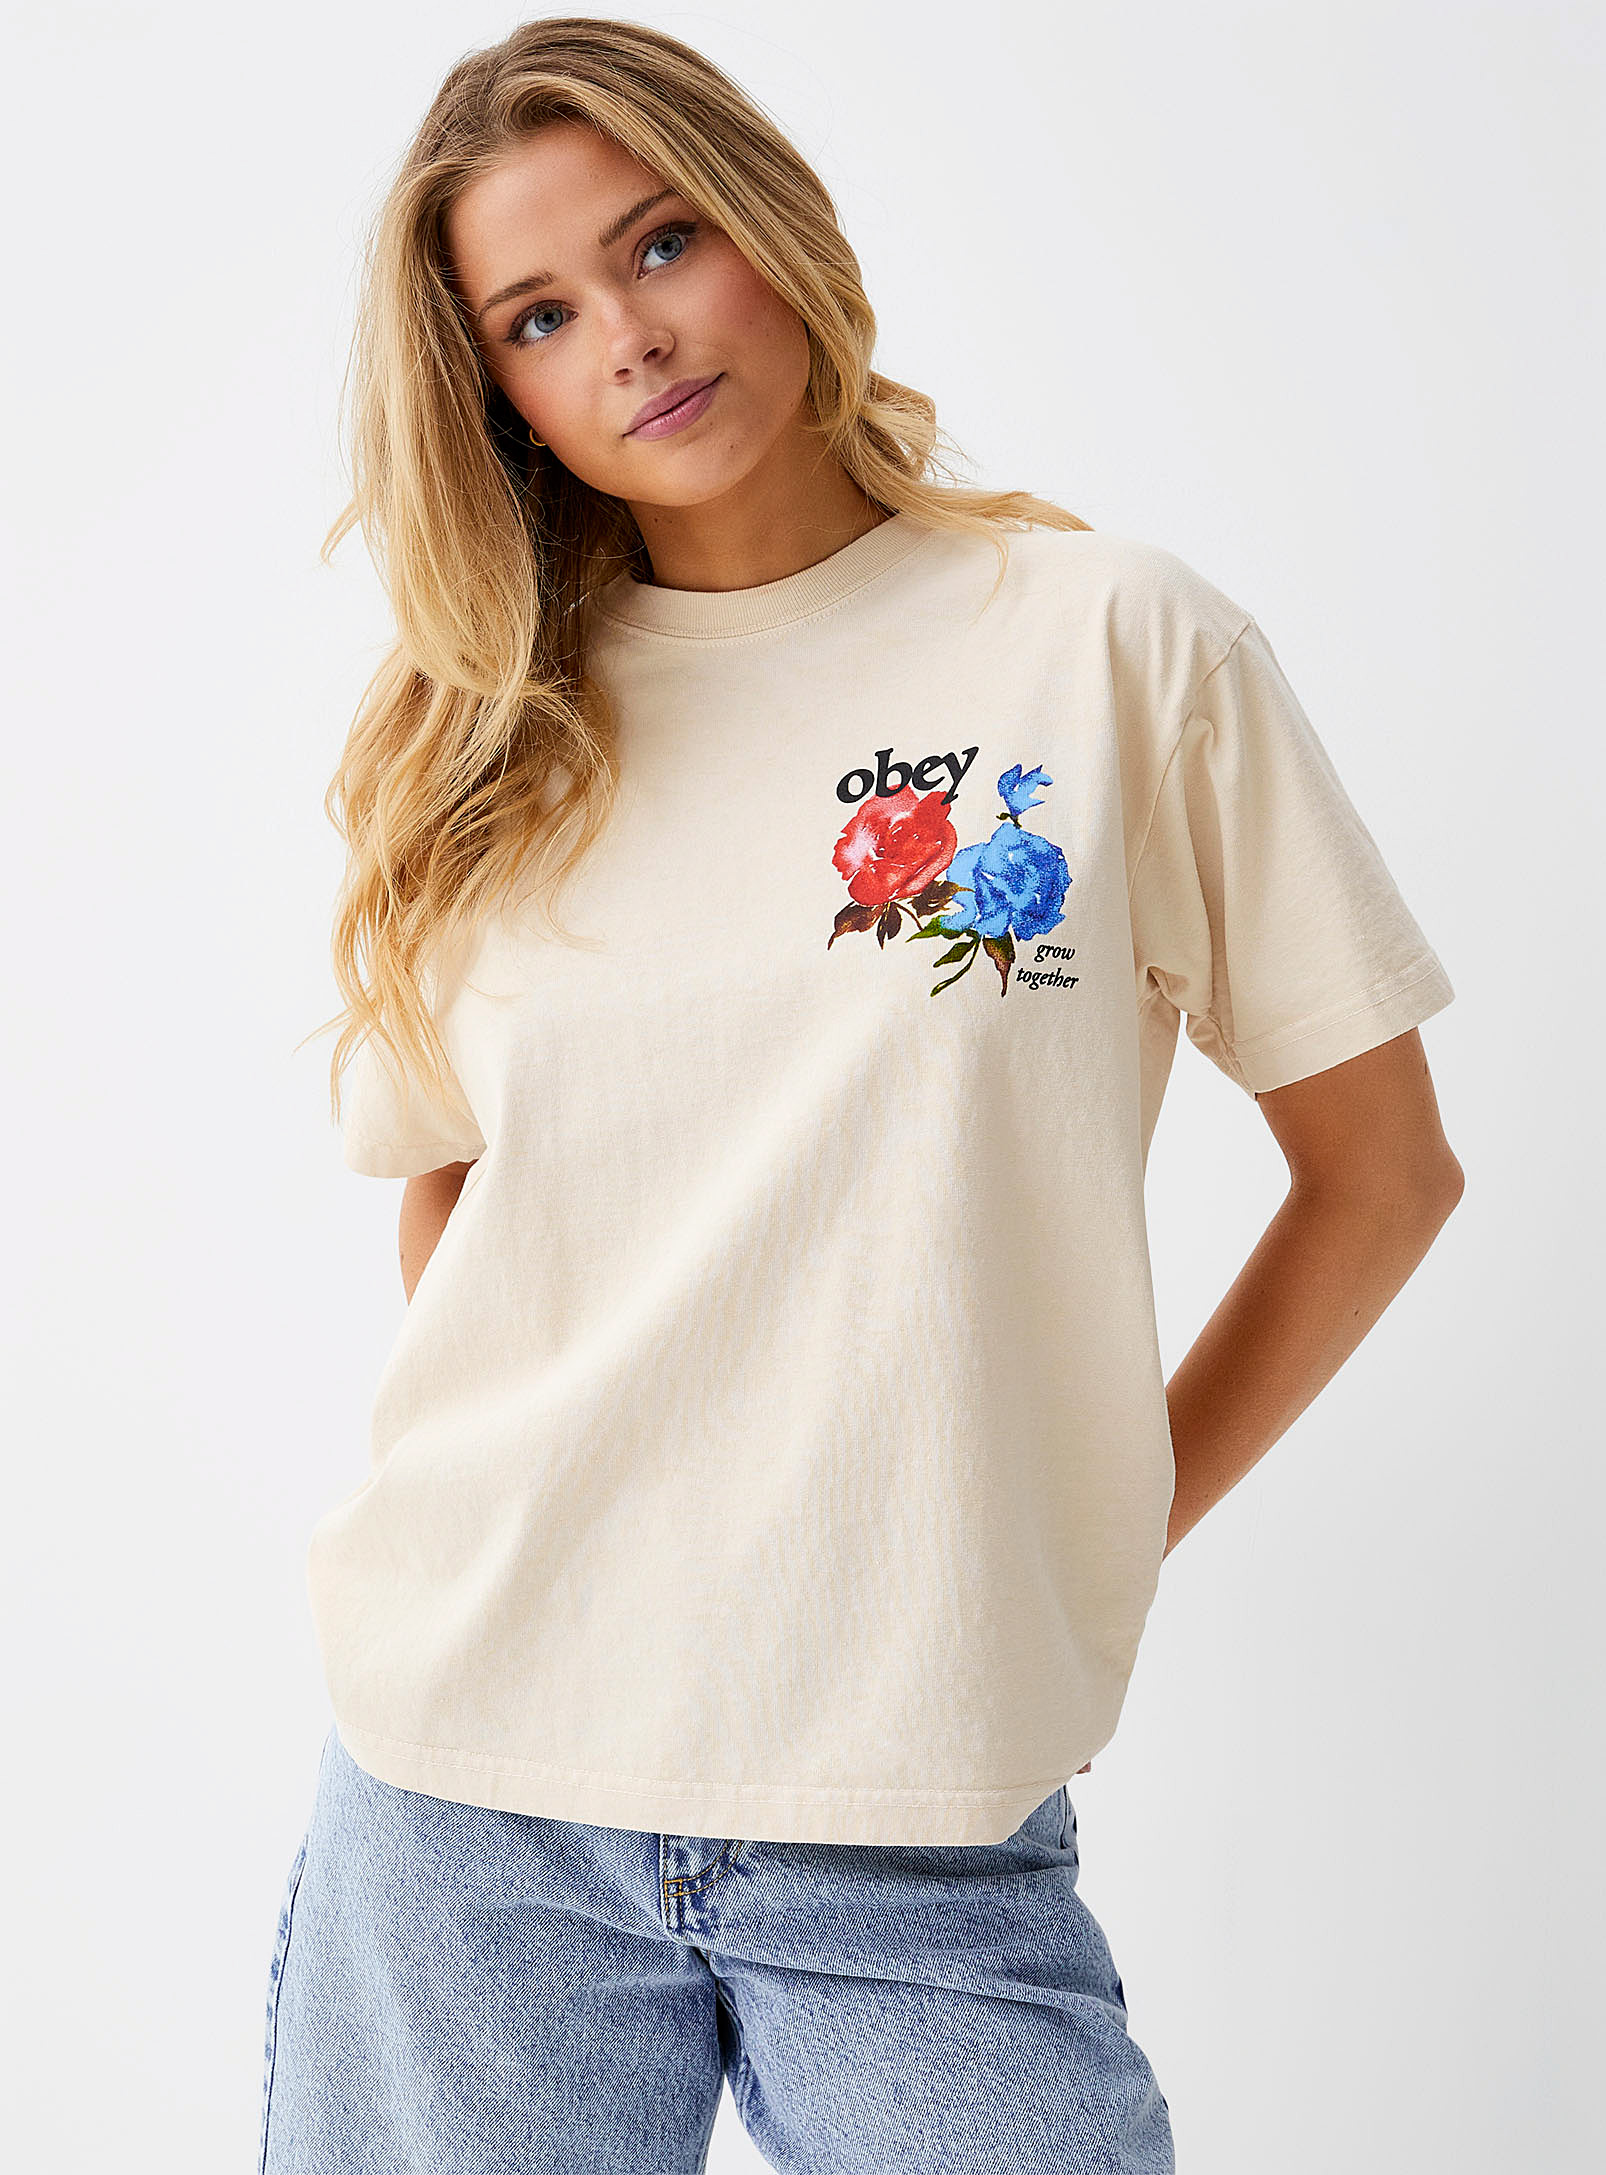 Obey - Le t-shirt Grow Together